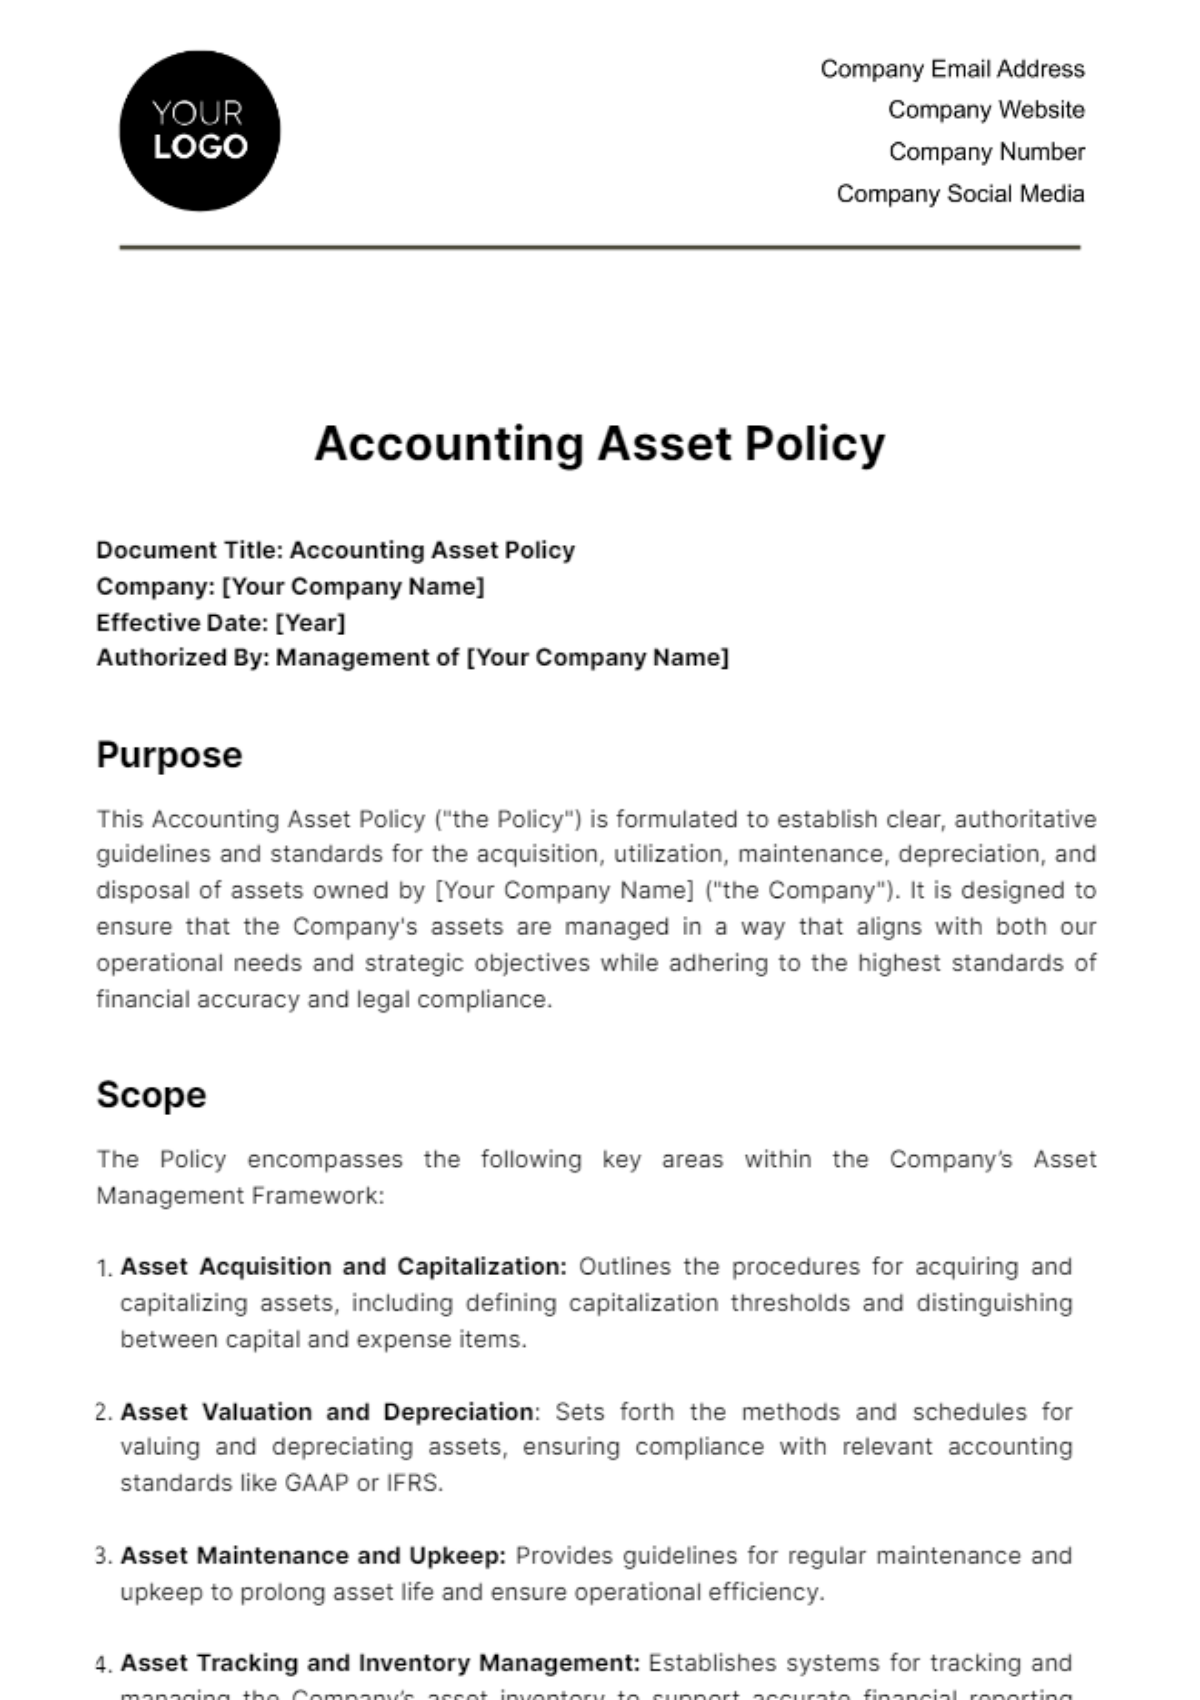 Accounting Asset Policy Template